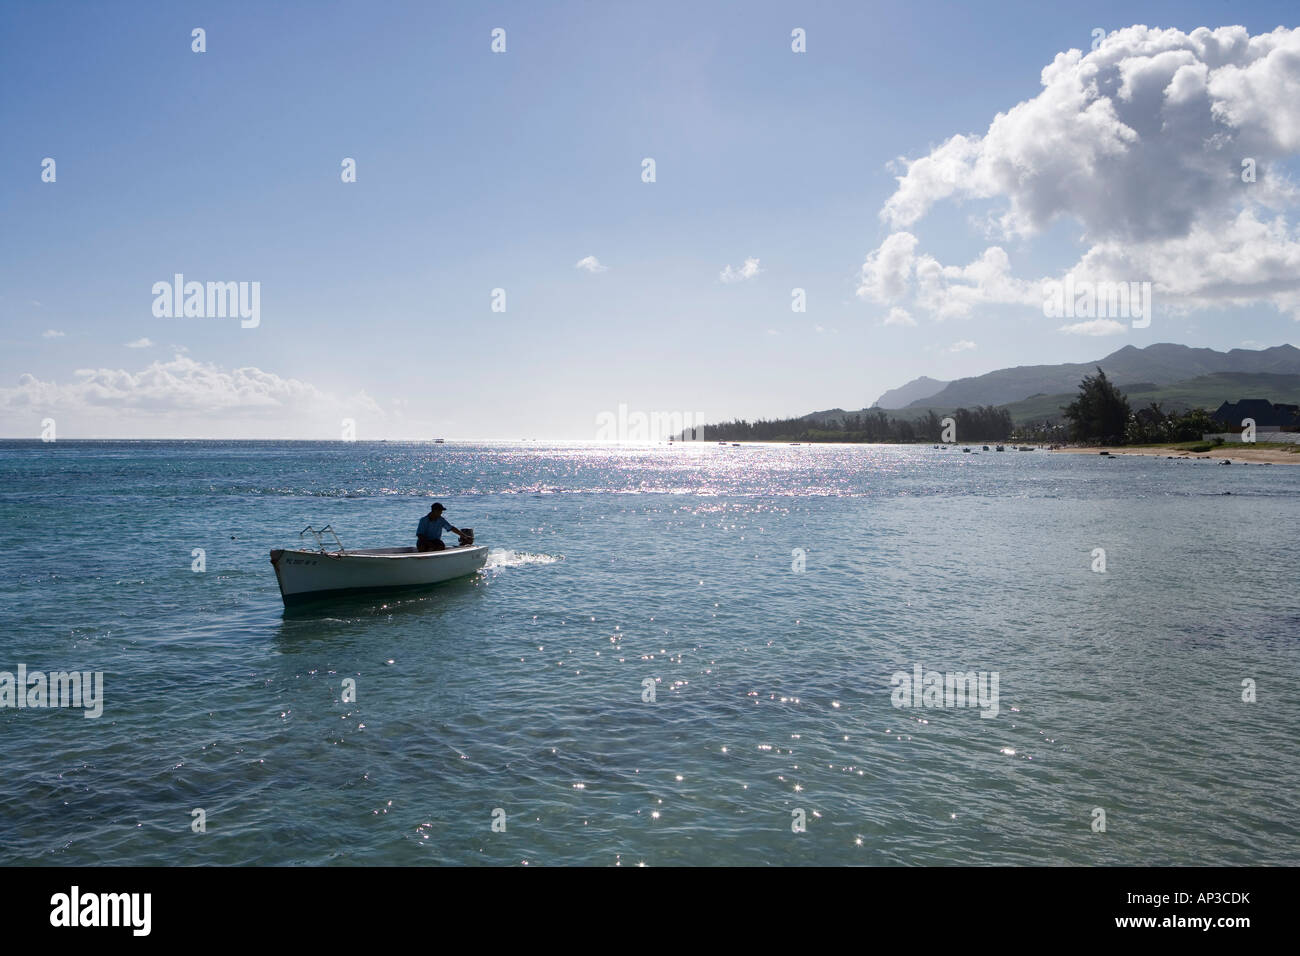 Fishing Boat and Coastline, Bel Ombre, Savanne District, Mauritius Stock Photo